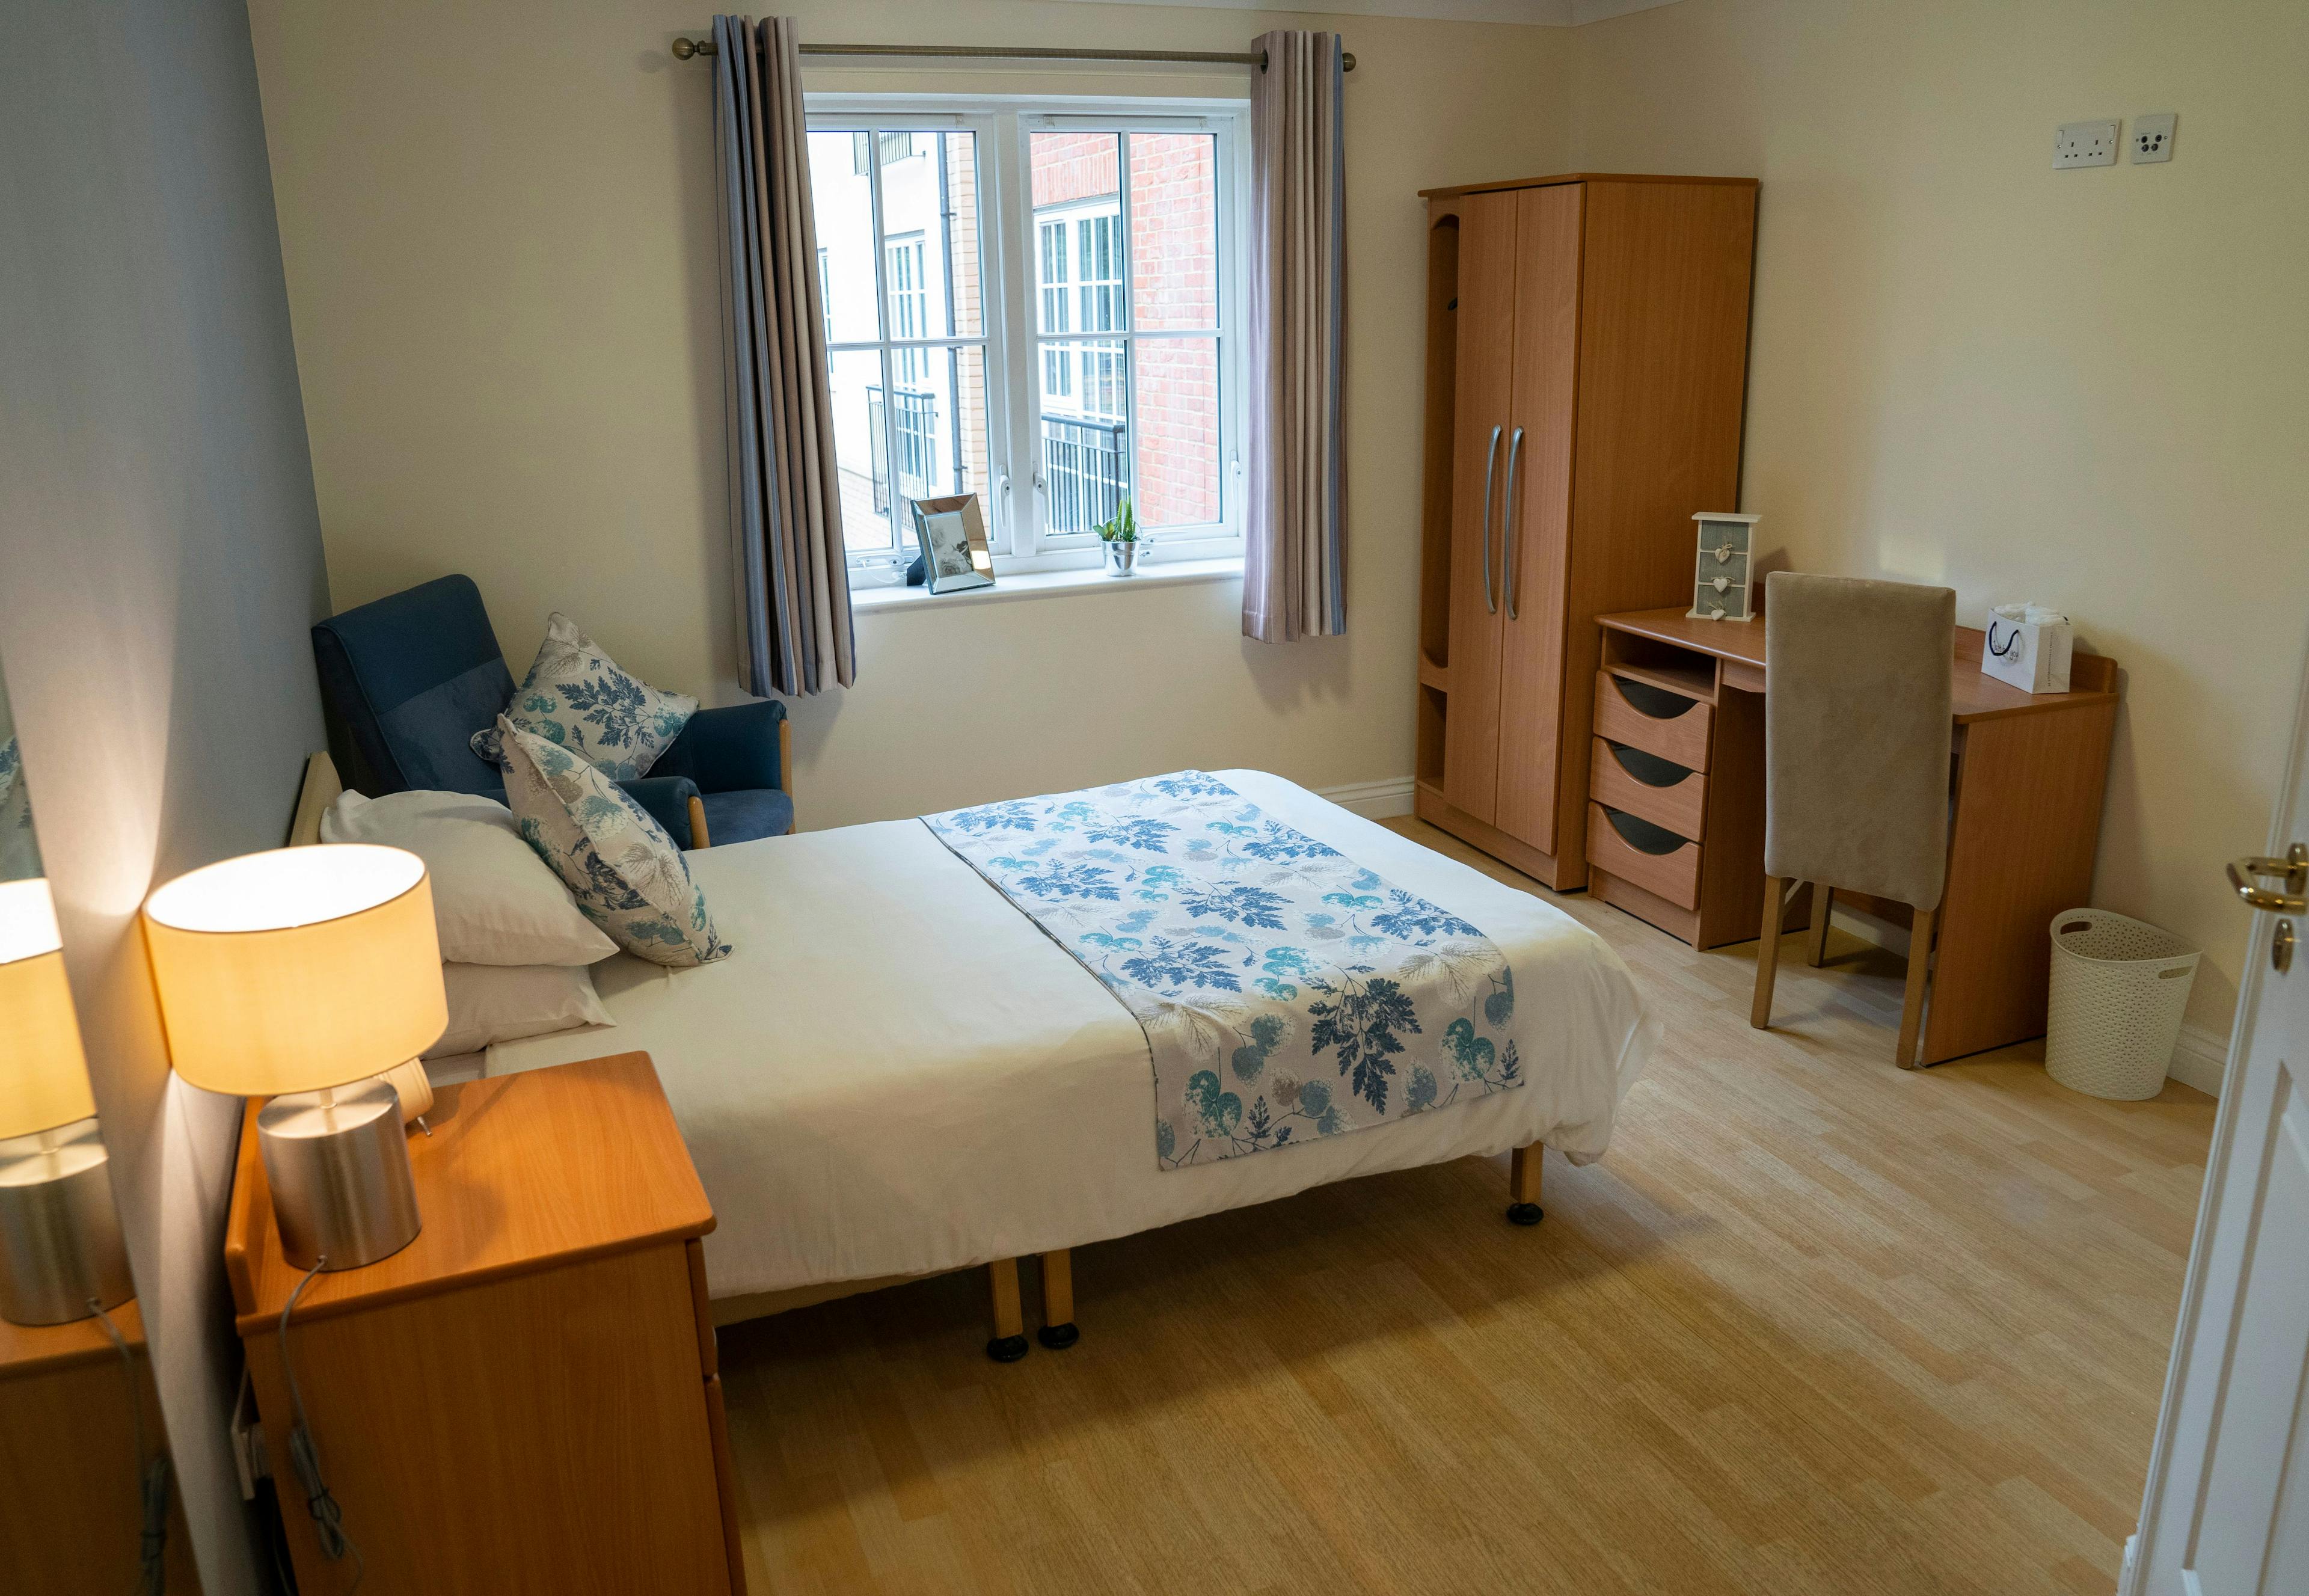 Bedroom of Iffley care home in Oxford, Oxfordshire